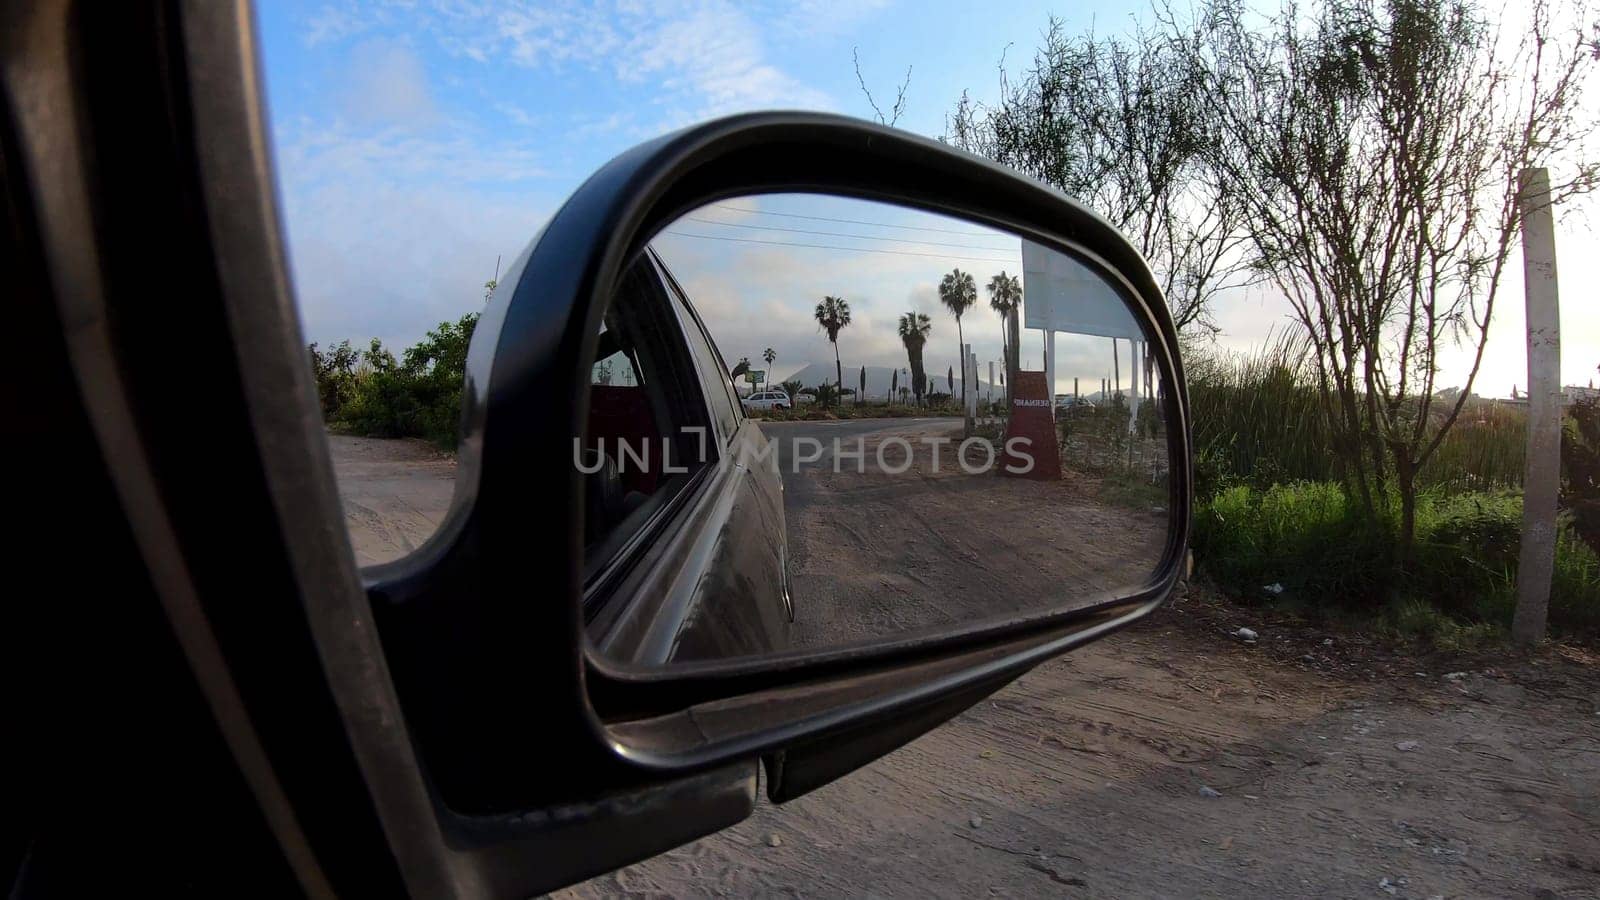 View of palm trees and a sunny day through the rearview mirror of a car